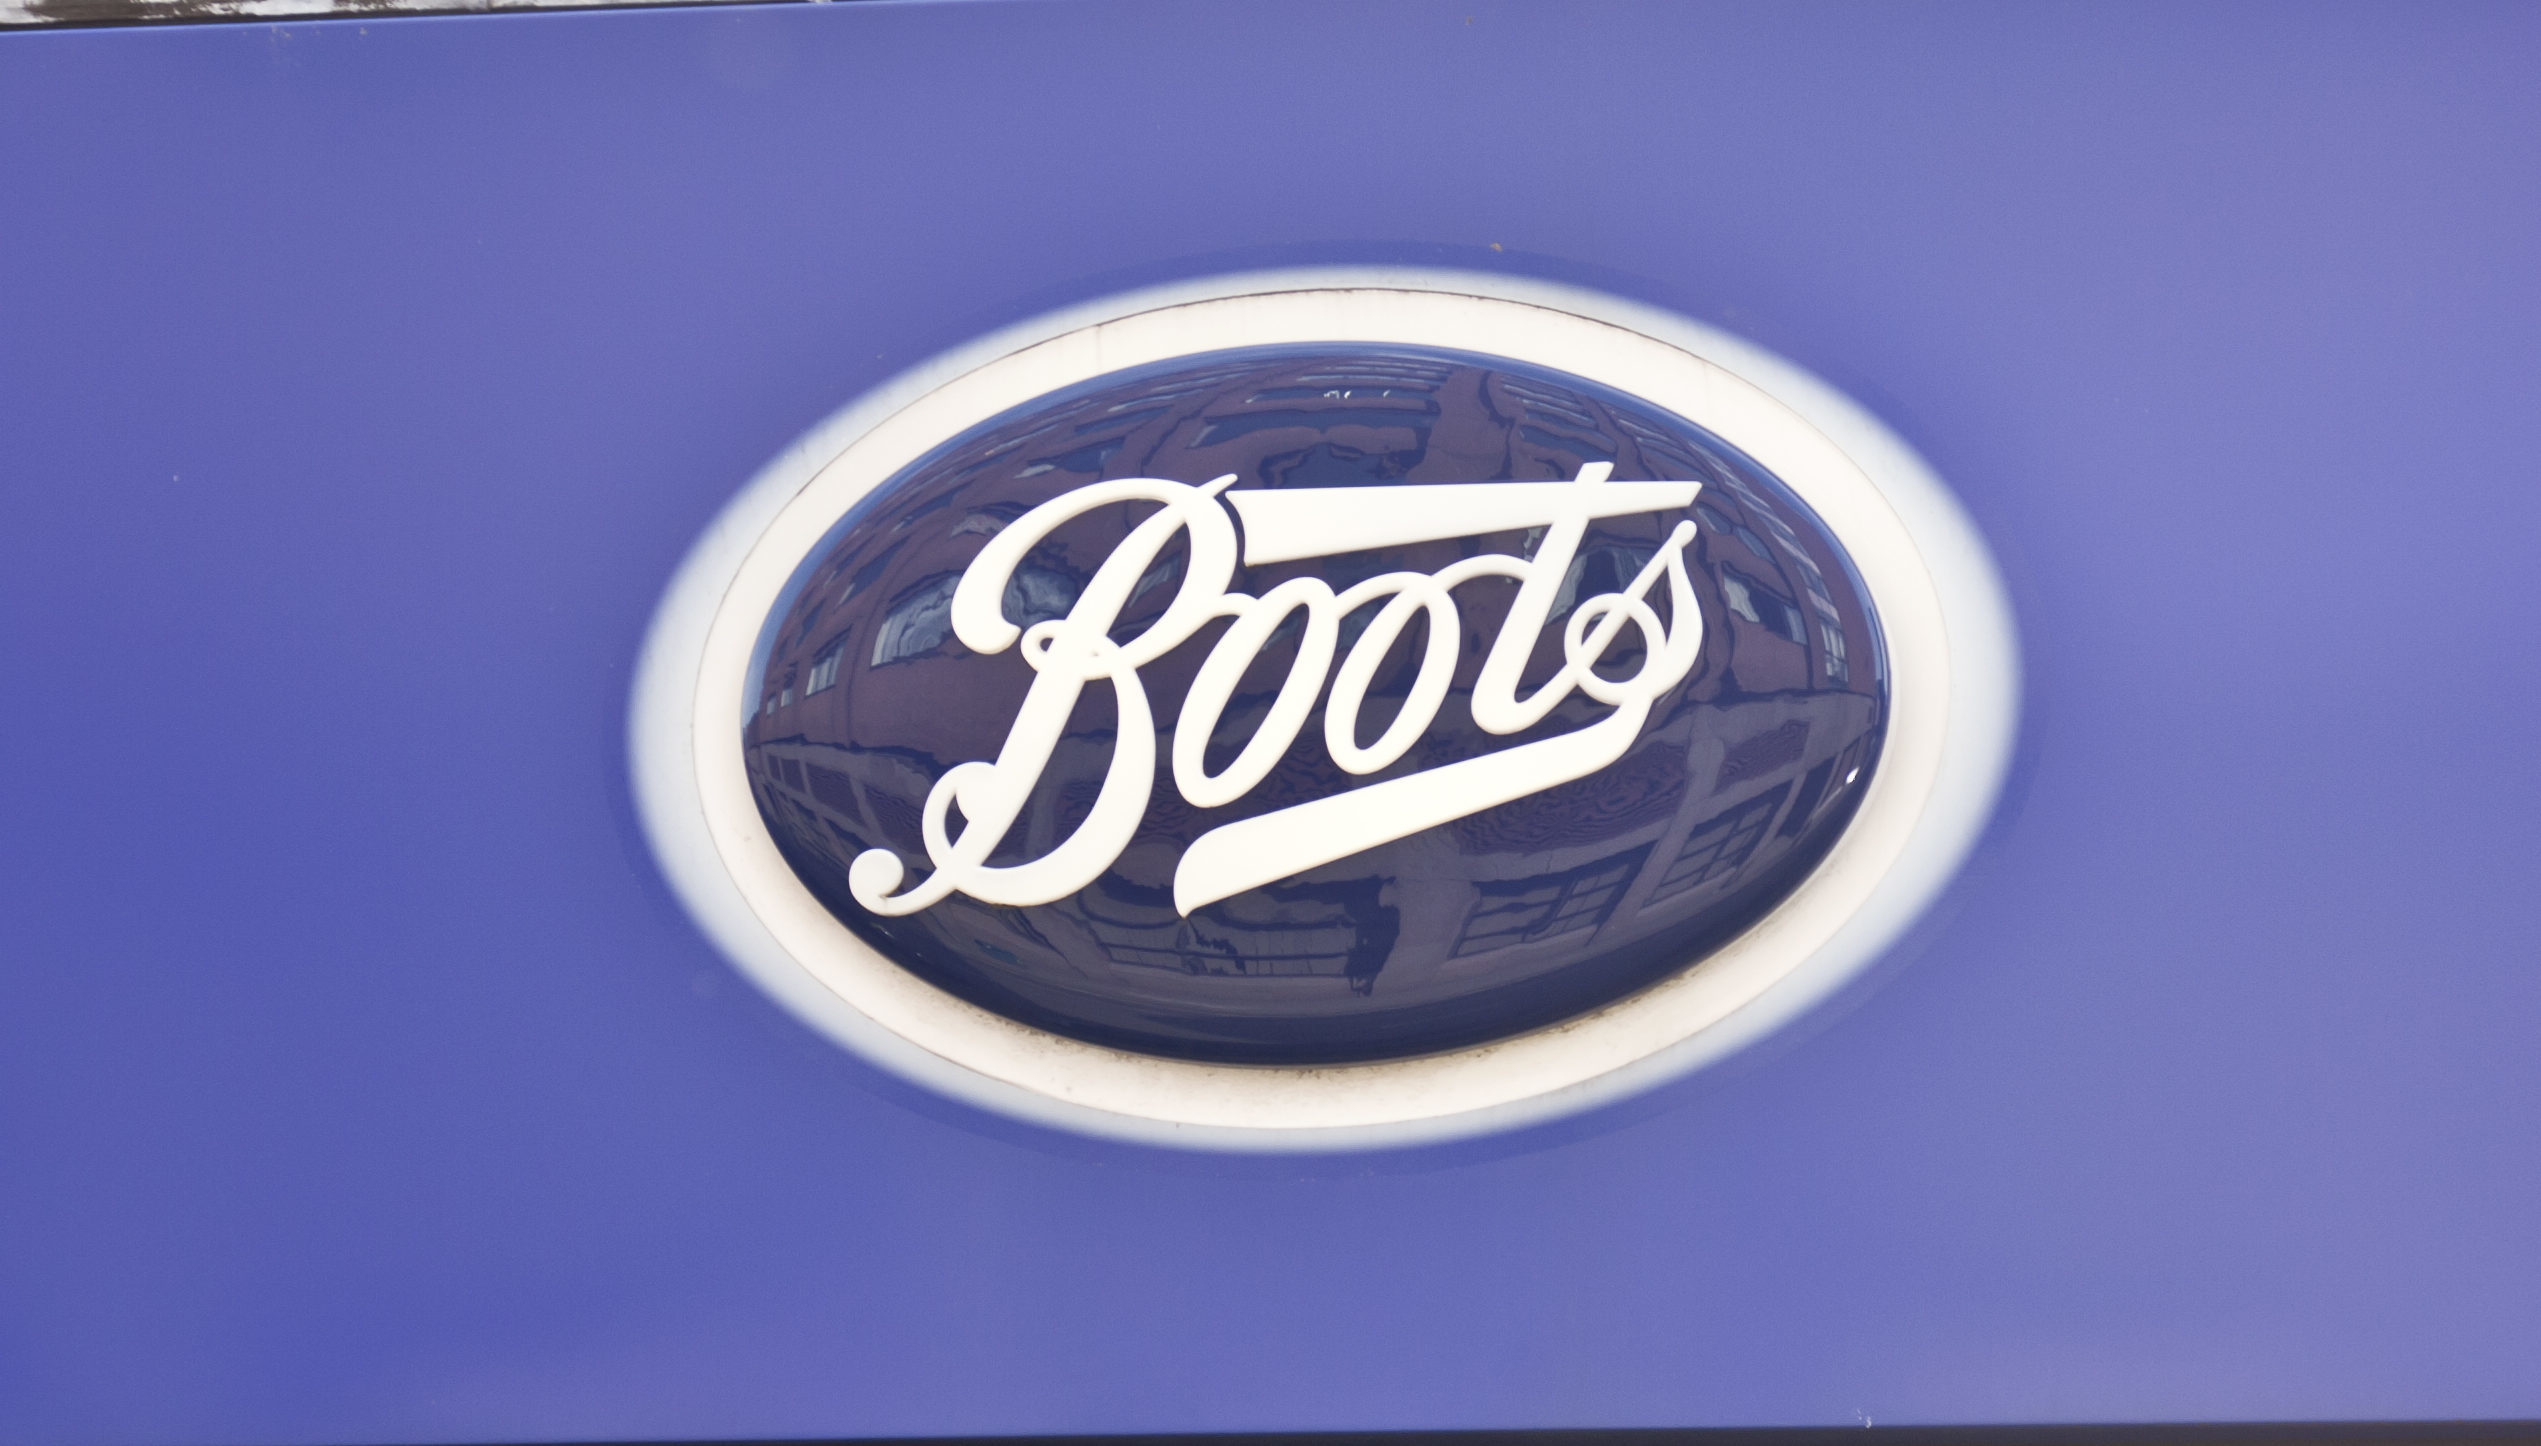 Boots achieved the highest score overall (Getty Images/iStock)